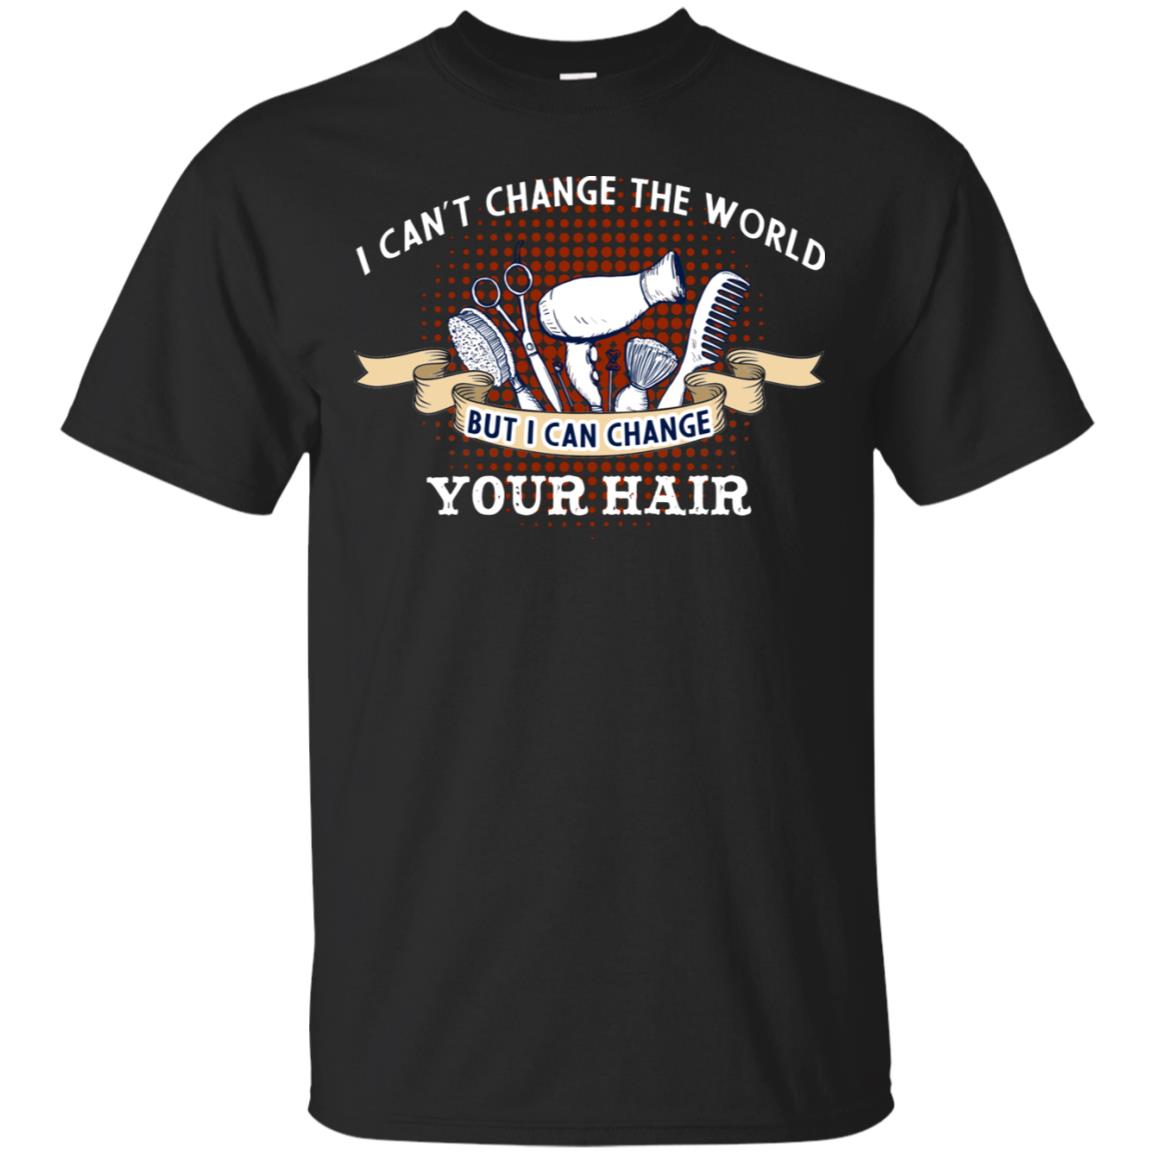 I Can't Change The World But I Can Change Your Hair Hairstylist Shirt For Mens WomensG200 Gildan Ultra Cotton T-Shirt